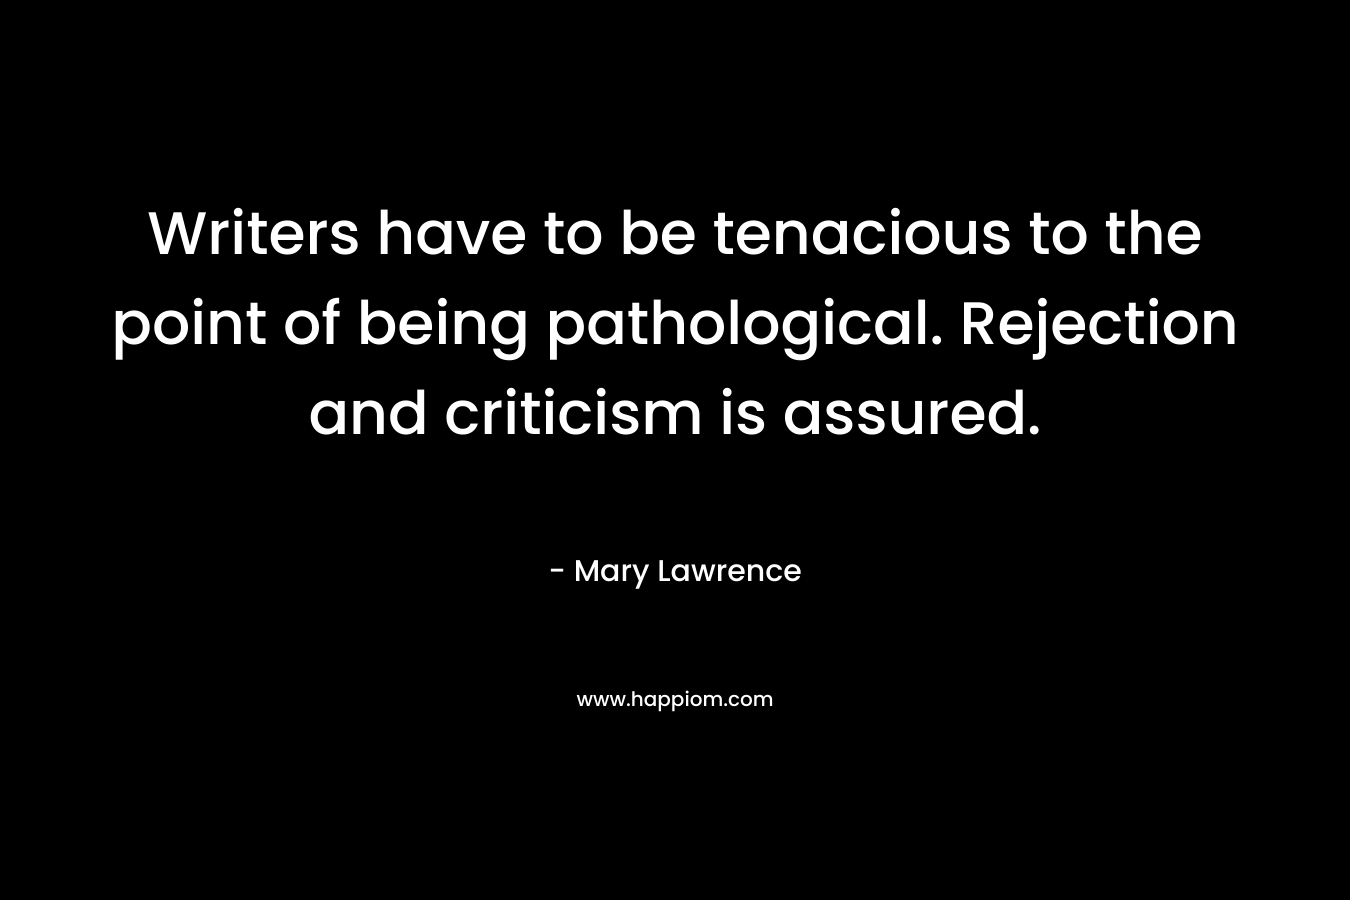 Writers have to be tenacious to the point of being pathological. Rejection and criticism is assured. – Mary Lawrence